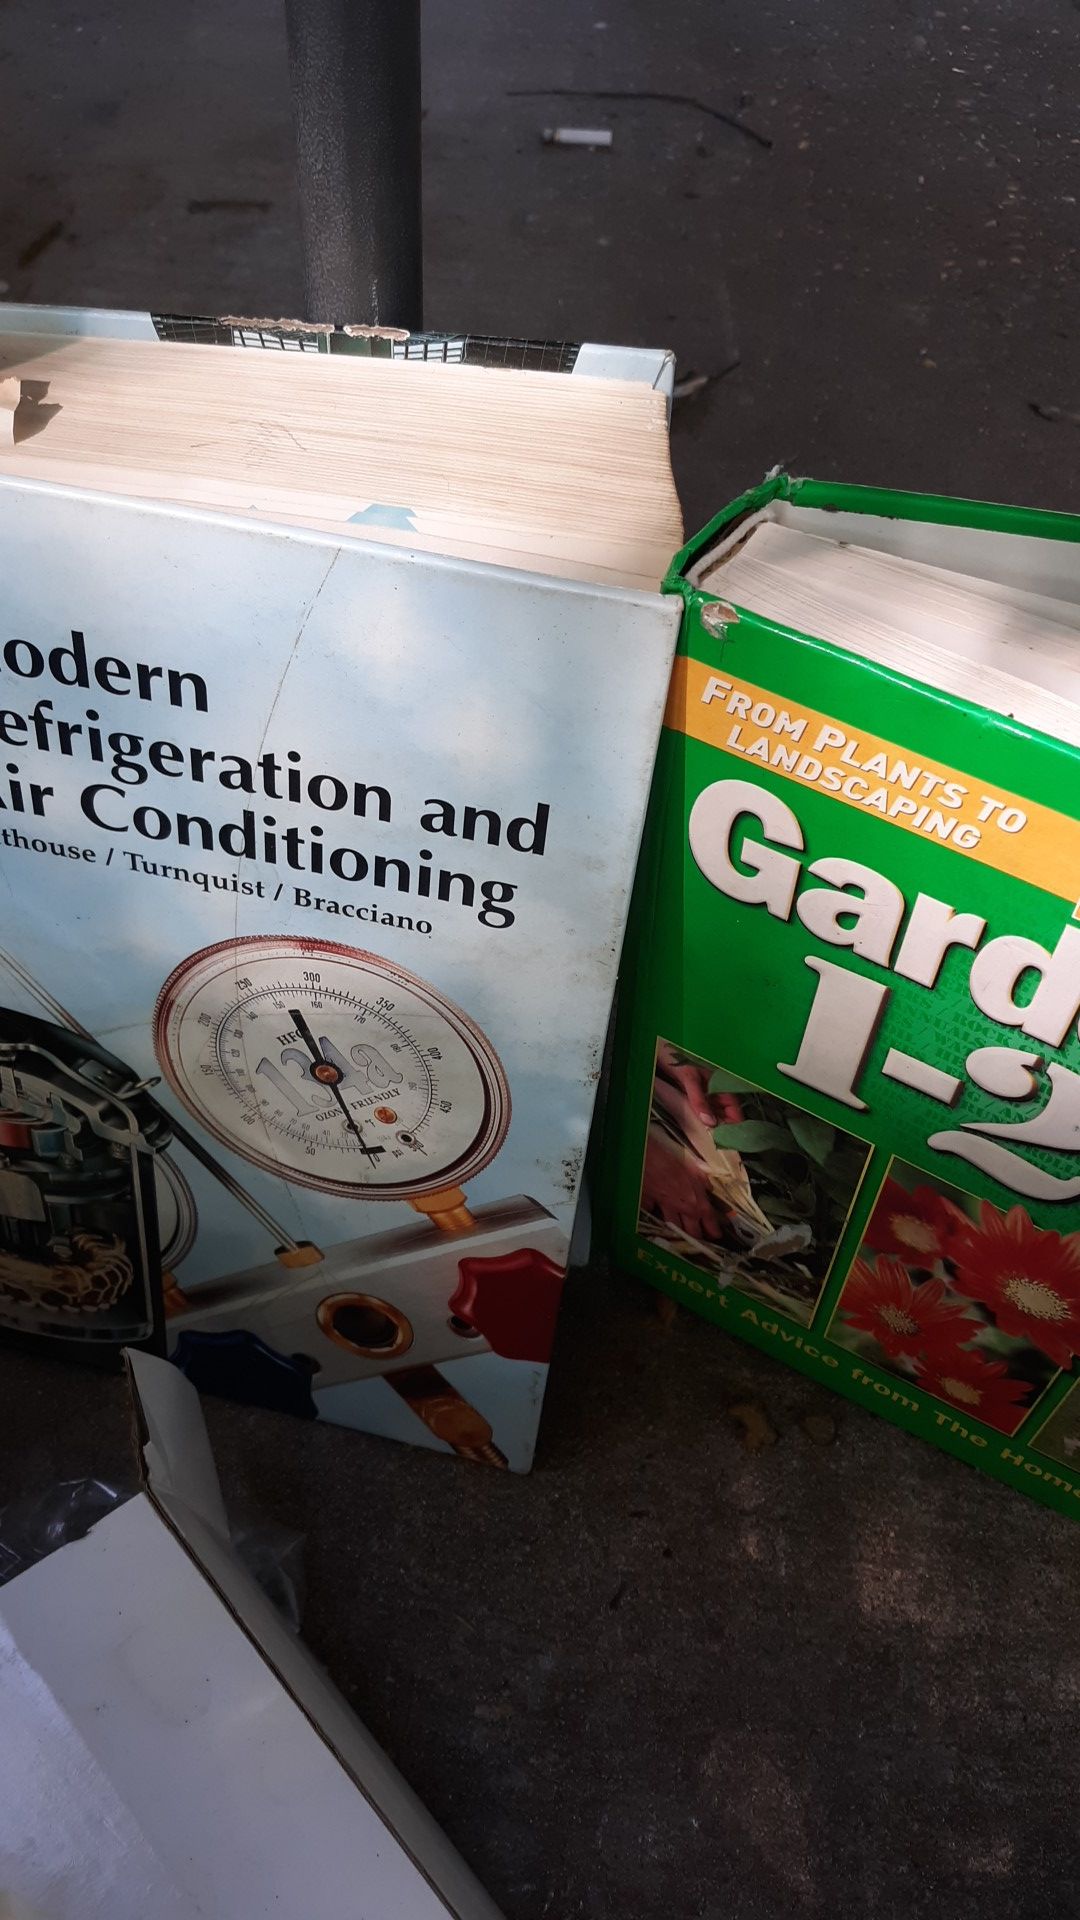 Modern refrigeration and air conditioning gardening books